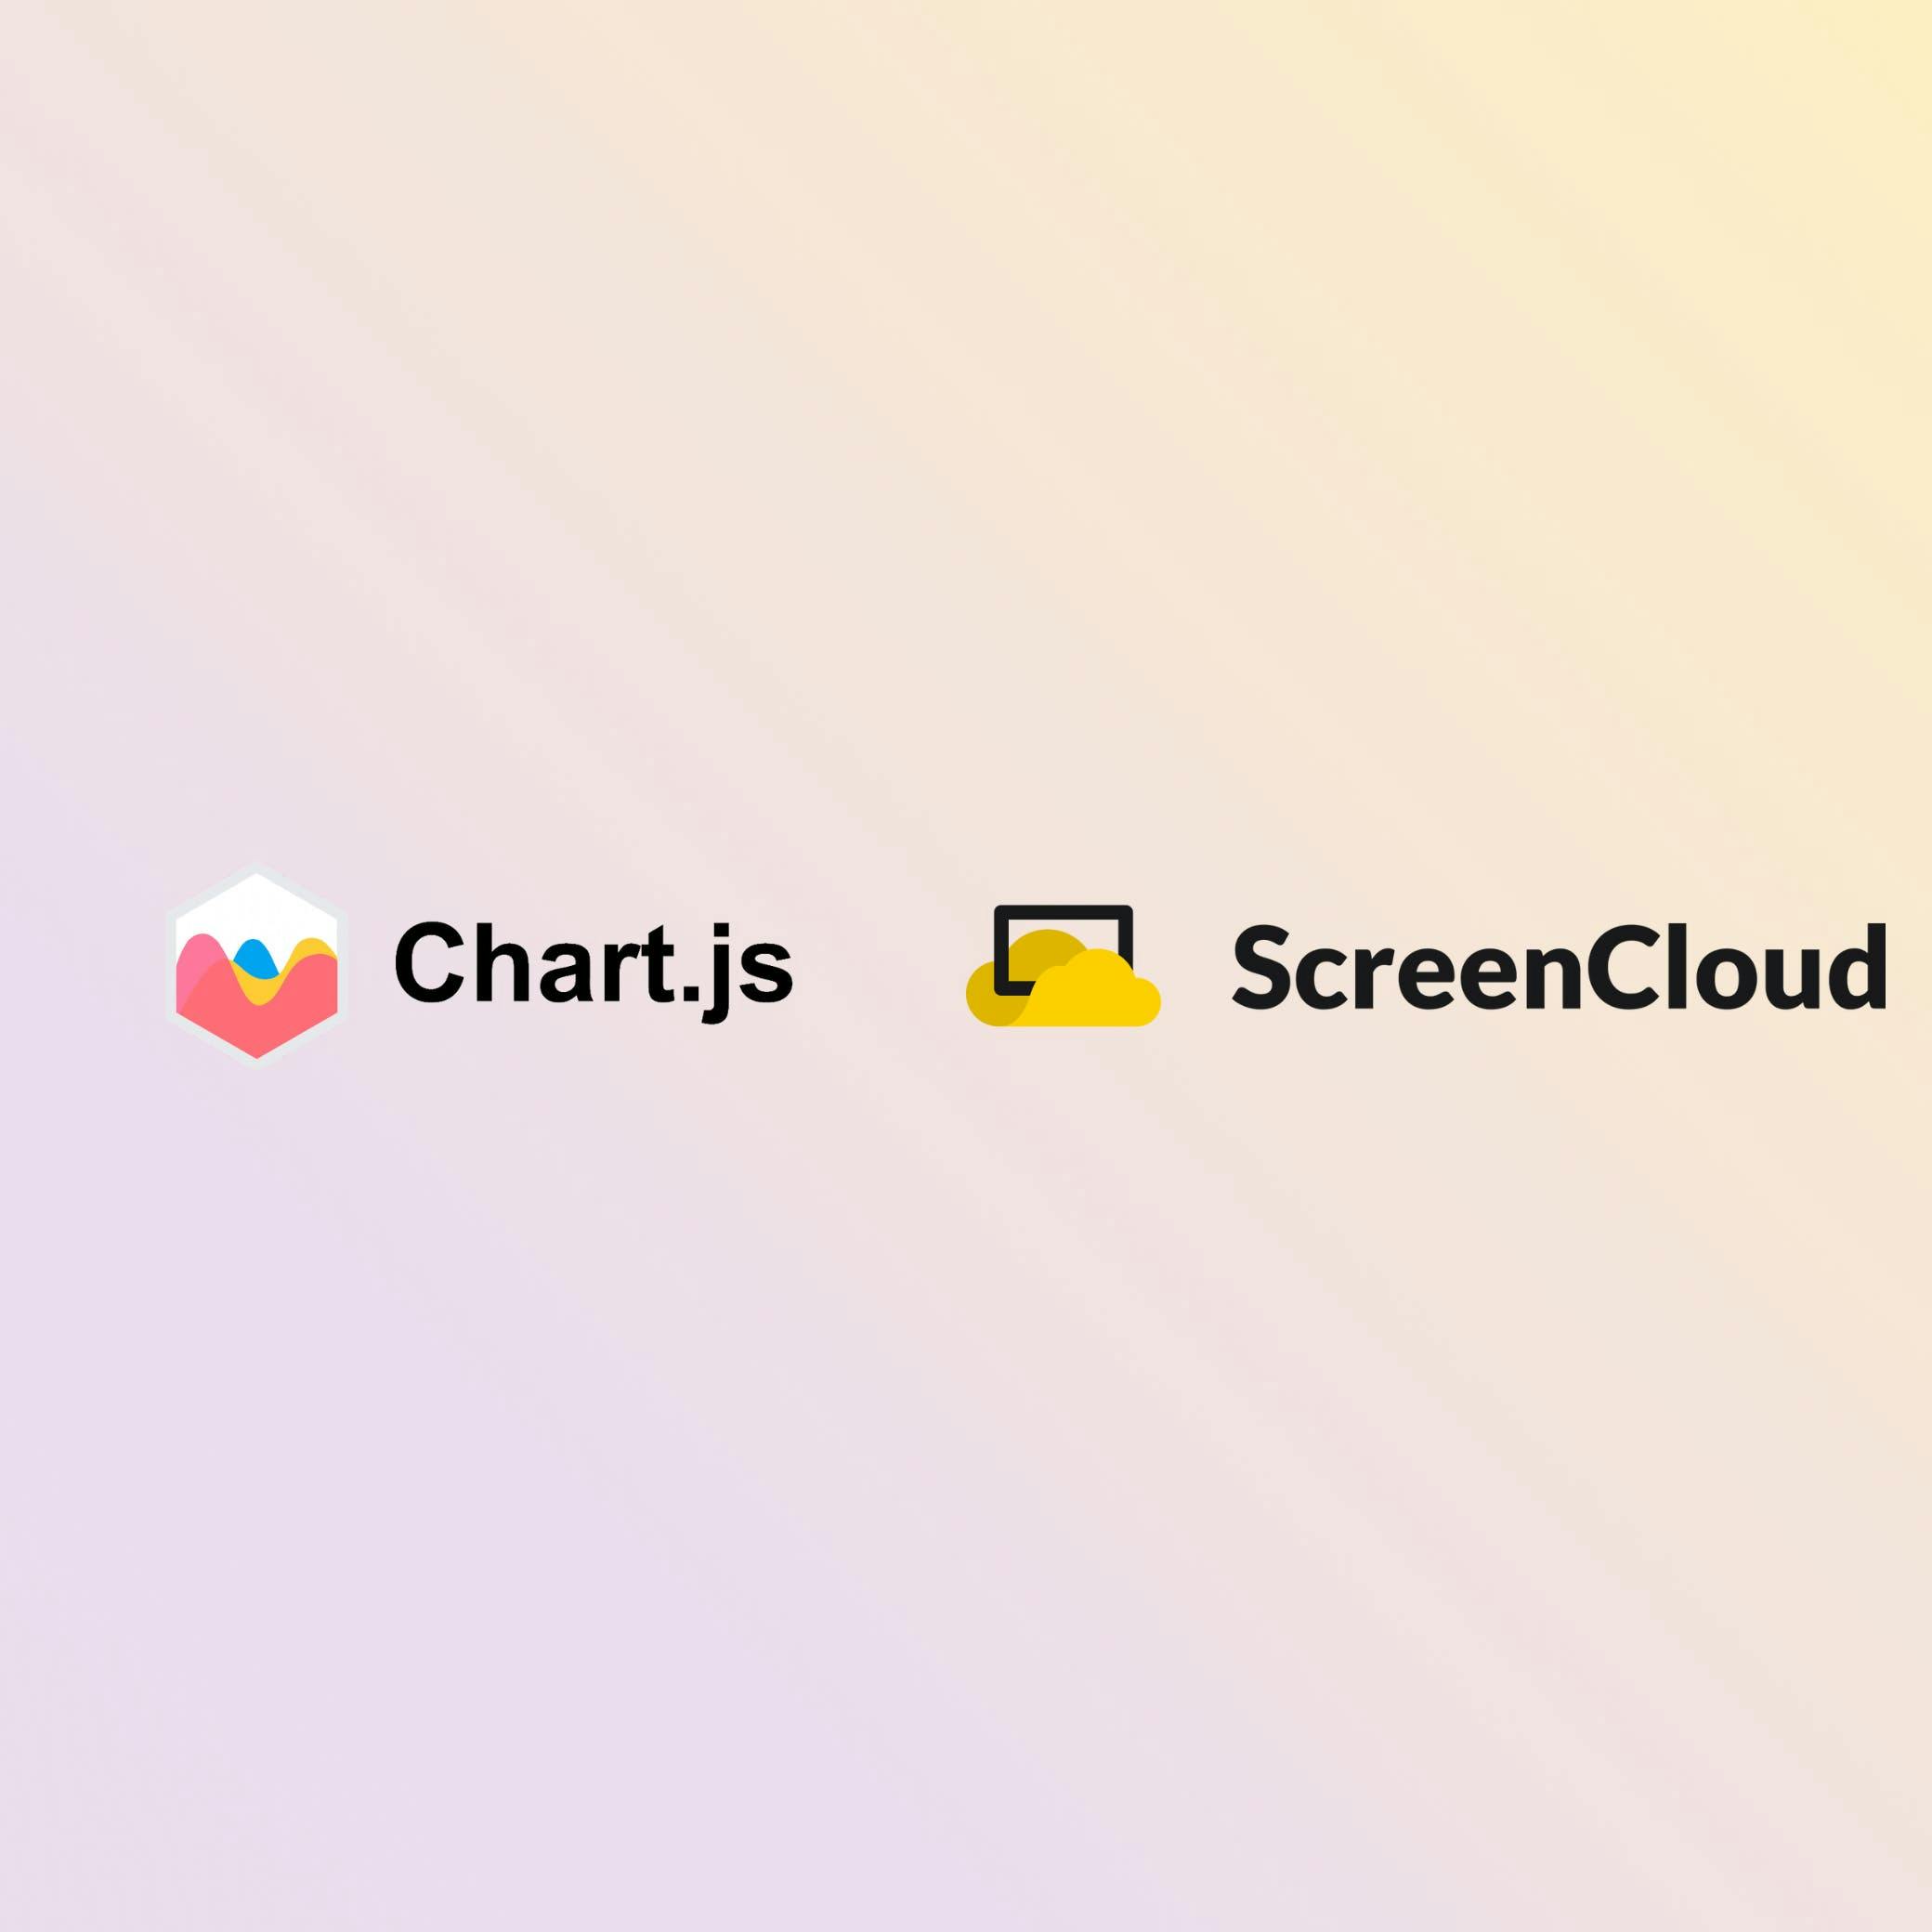 ScreenCloud Article - A Beginner Chart.js Tutorial for Company Communications